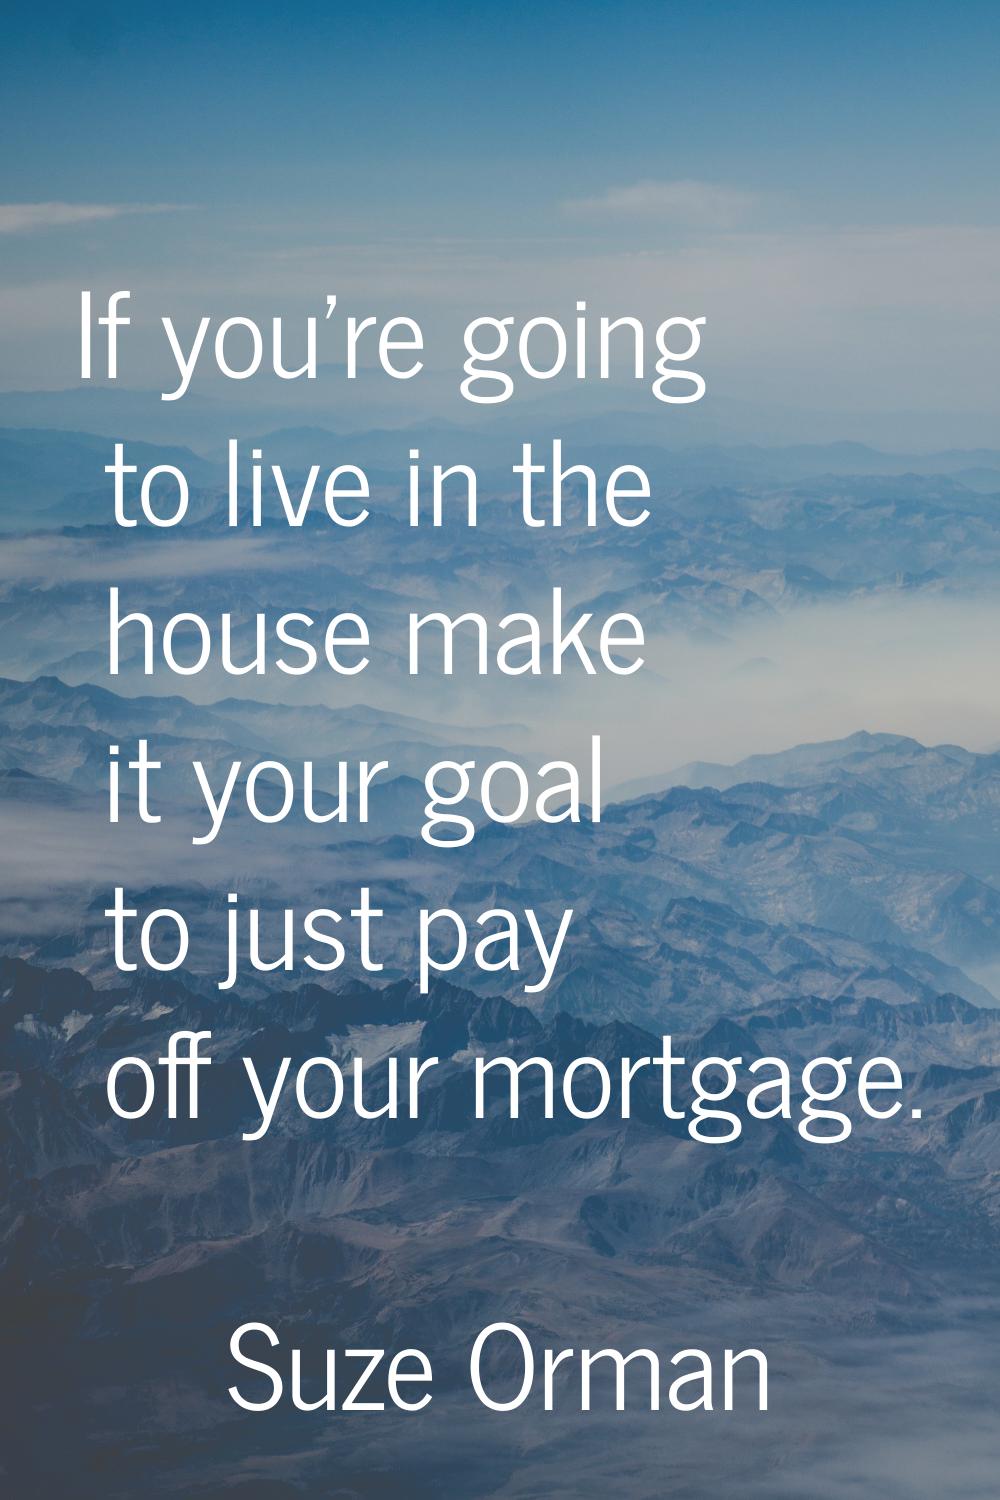 If you're going to live in the house make it your goal to just pay off your mortgage.